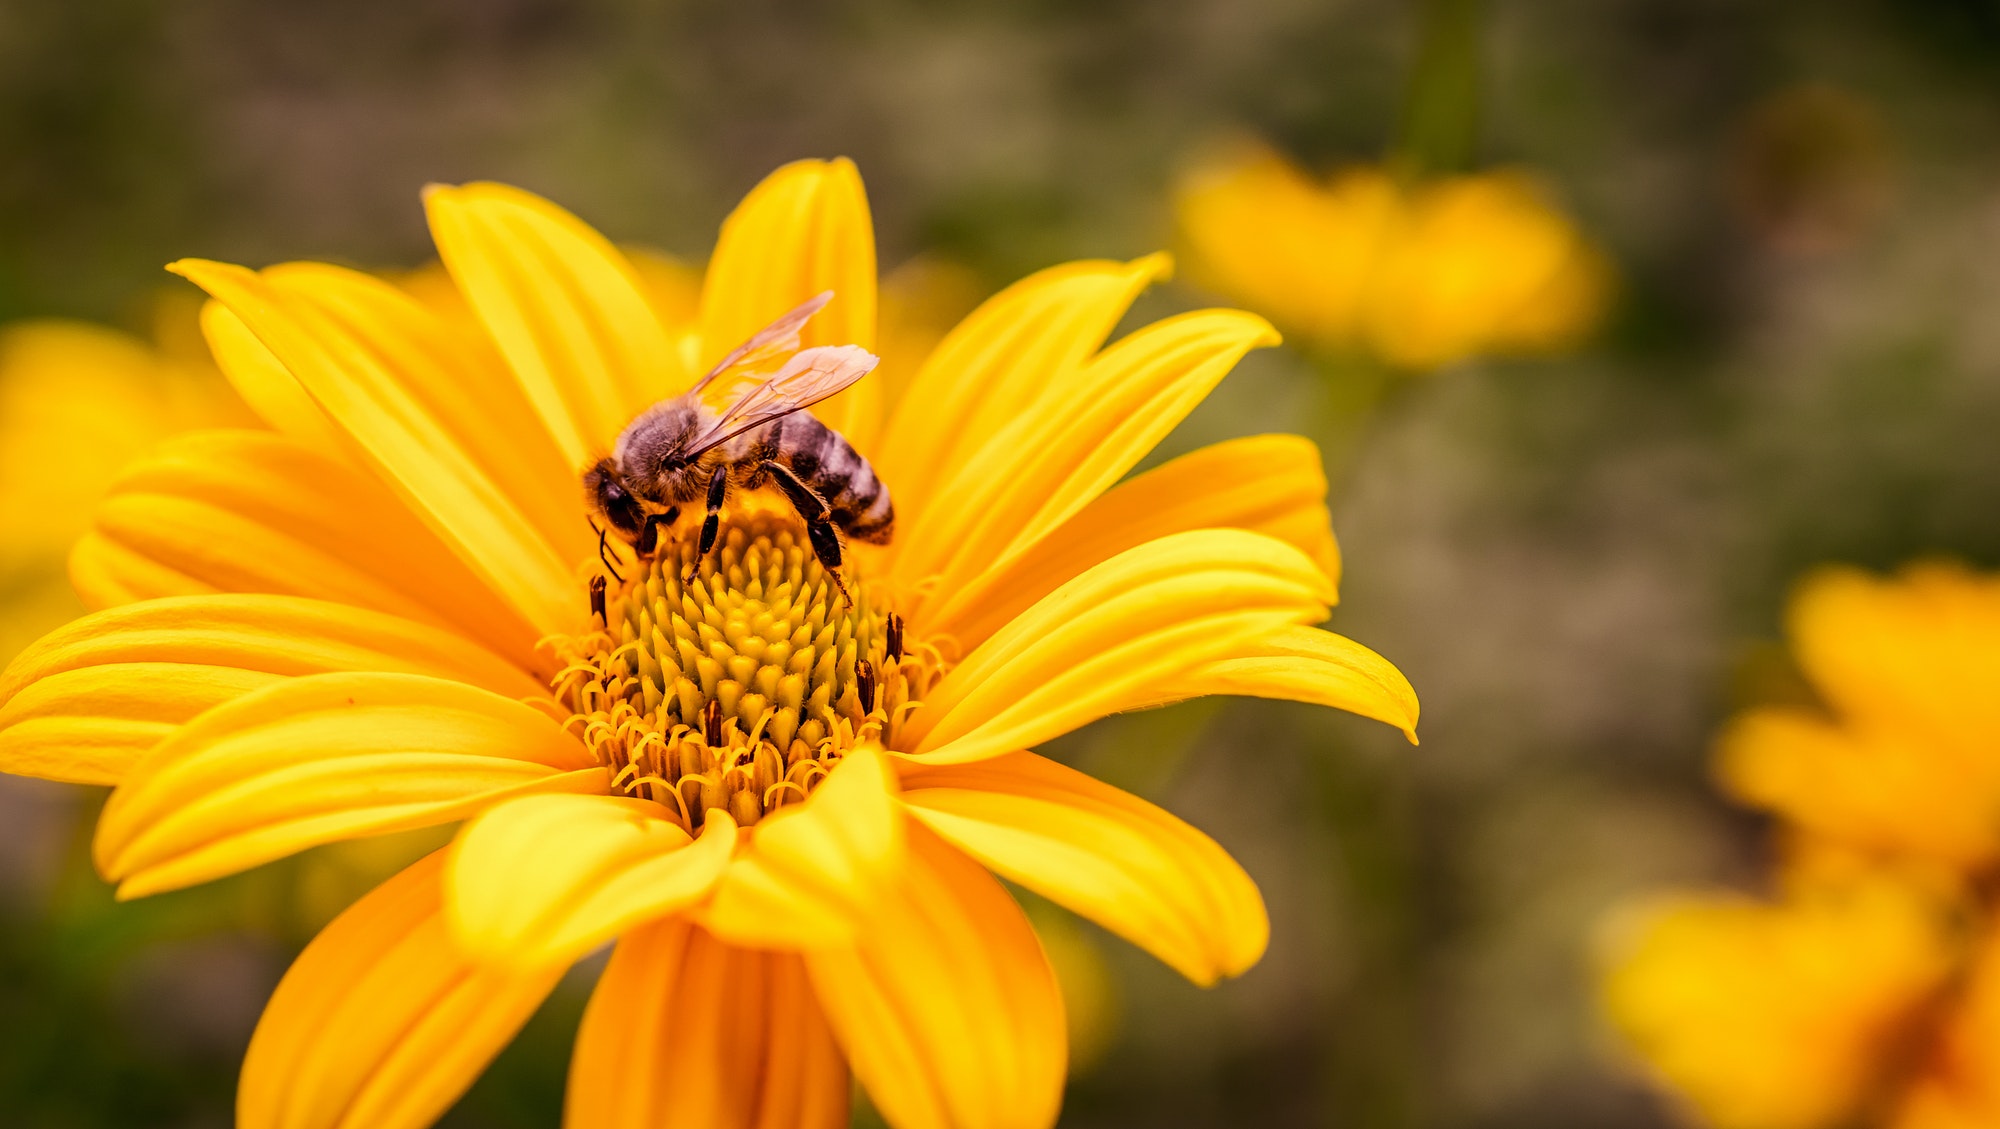 Yellow flower with bee inside